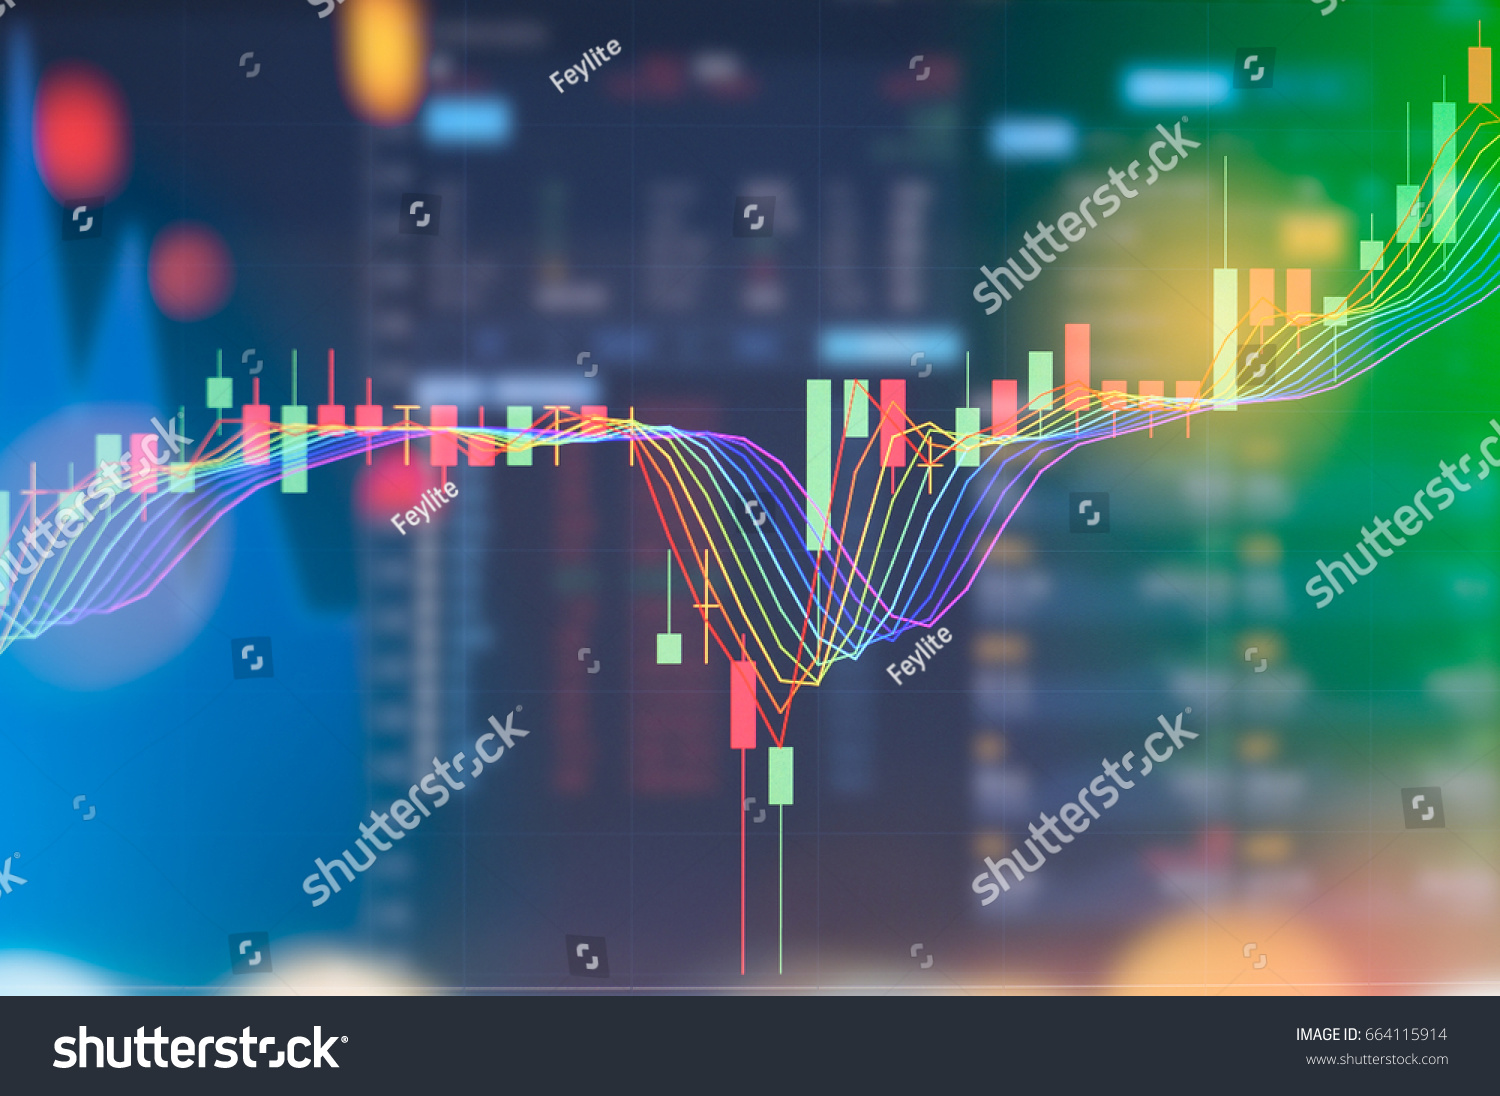 Stock market digital graph chart on LED display concept. A large display of daily stock market price and quotation. Indicator financial forex trade education background. #664115914